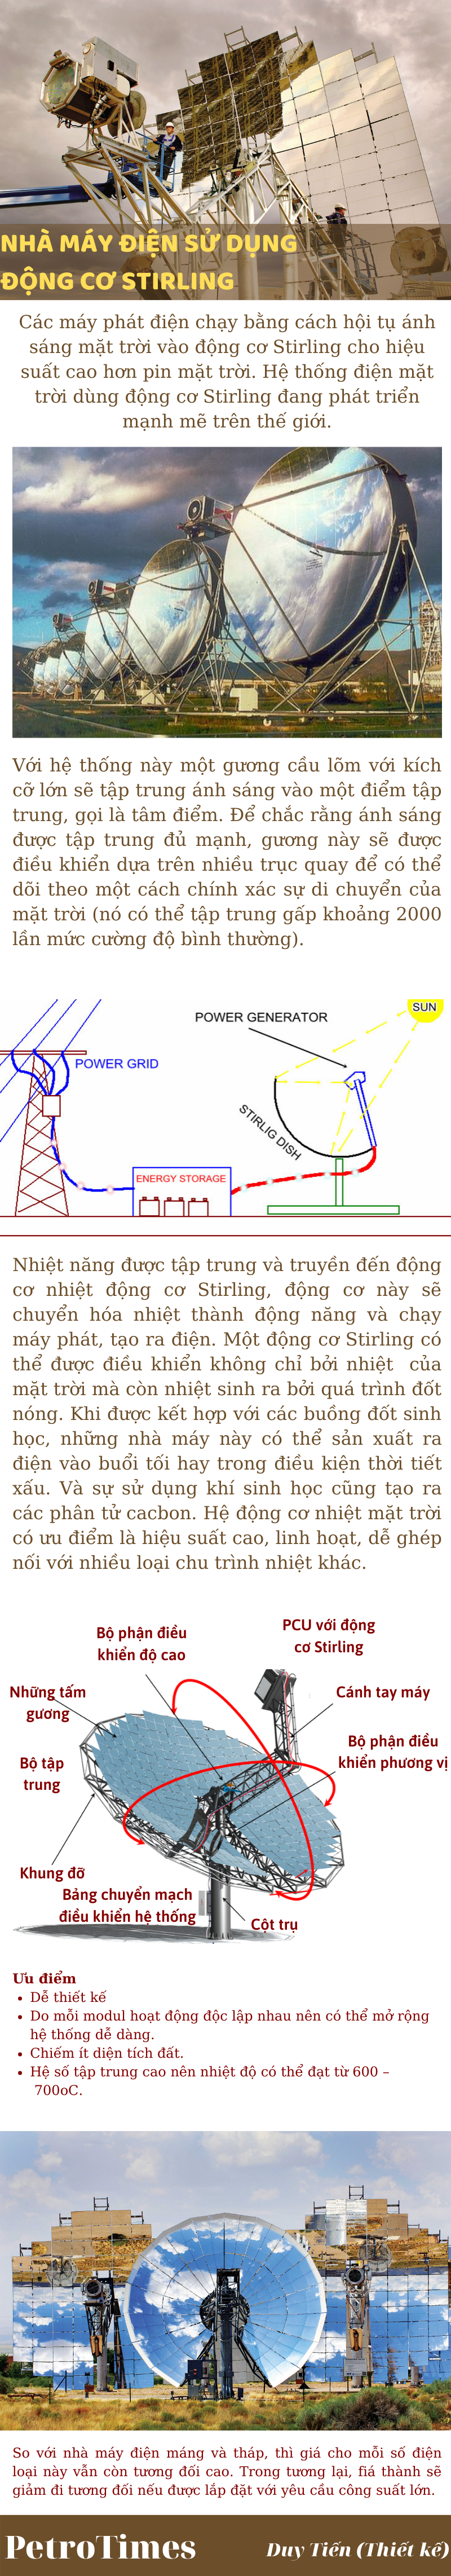 infographic nha may dien su dung dong co stirling